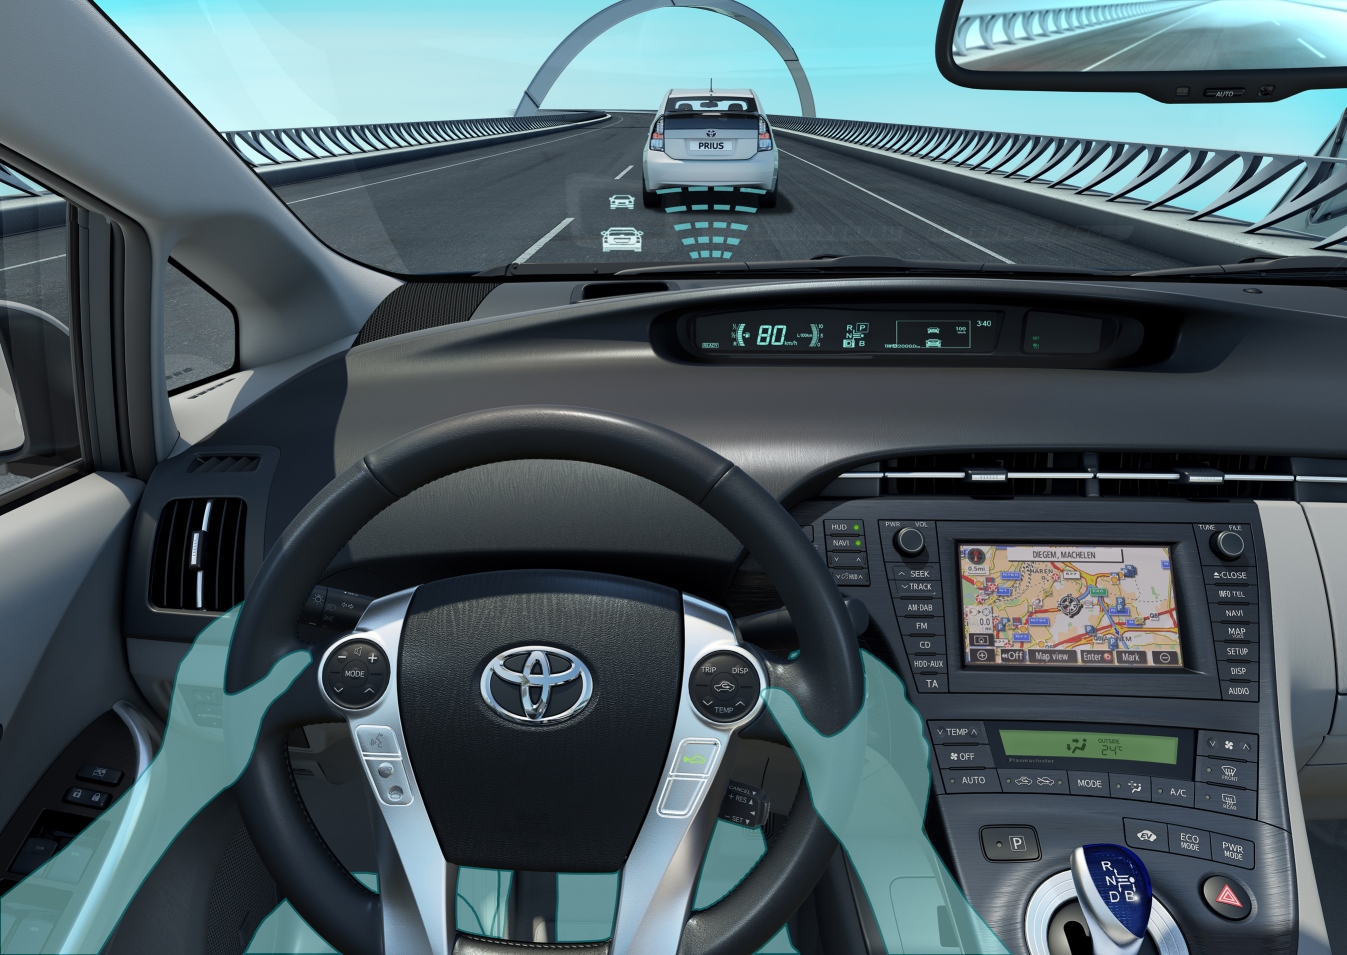 New Safety Pack option for Prius including Adaptive Cruise Control